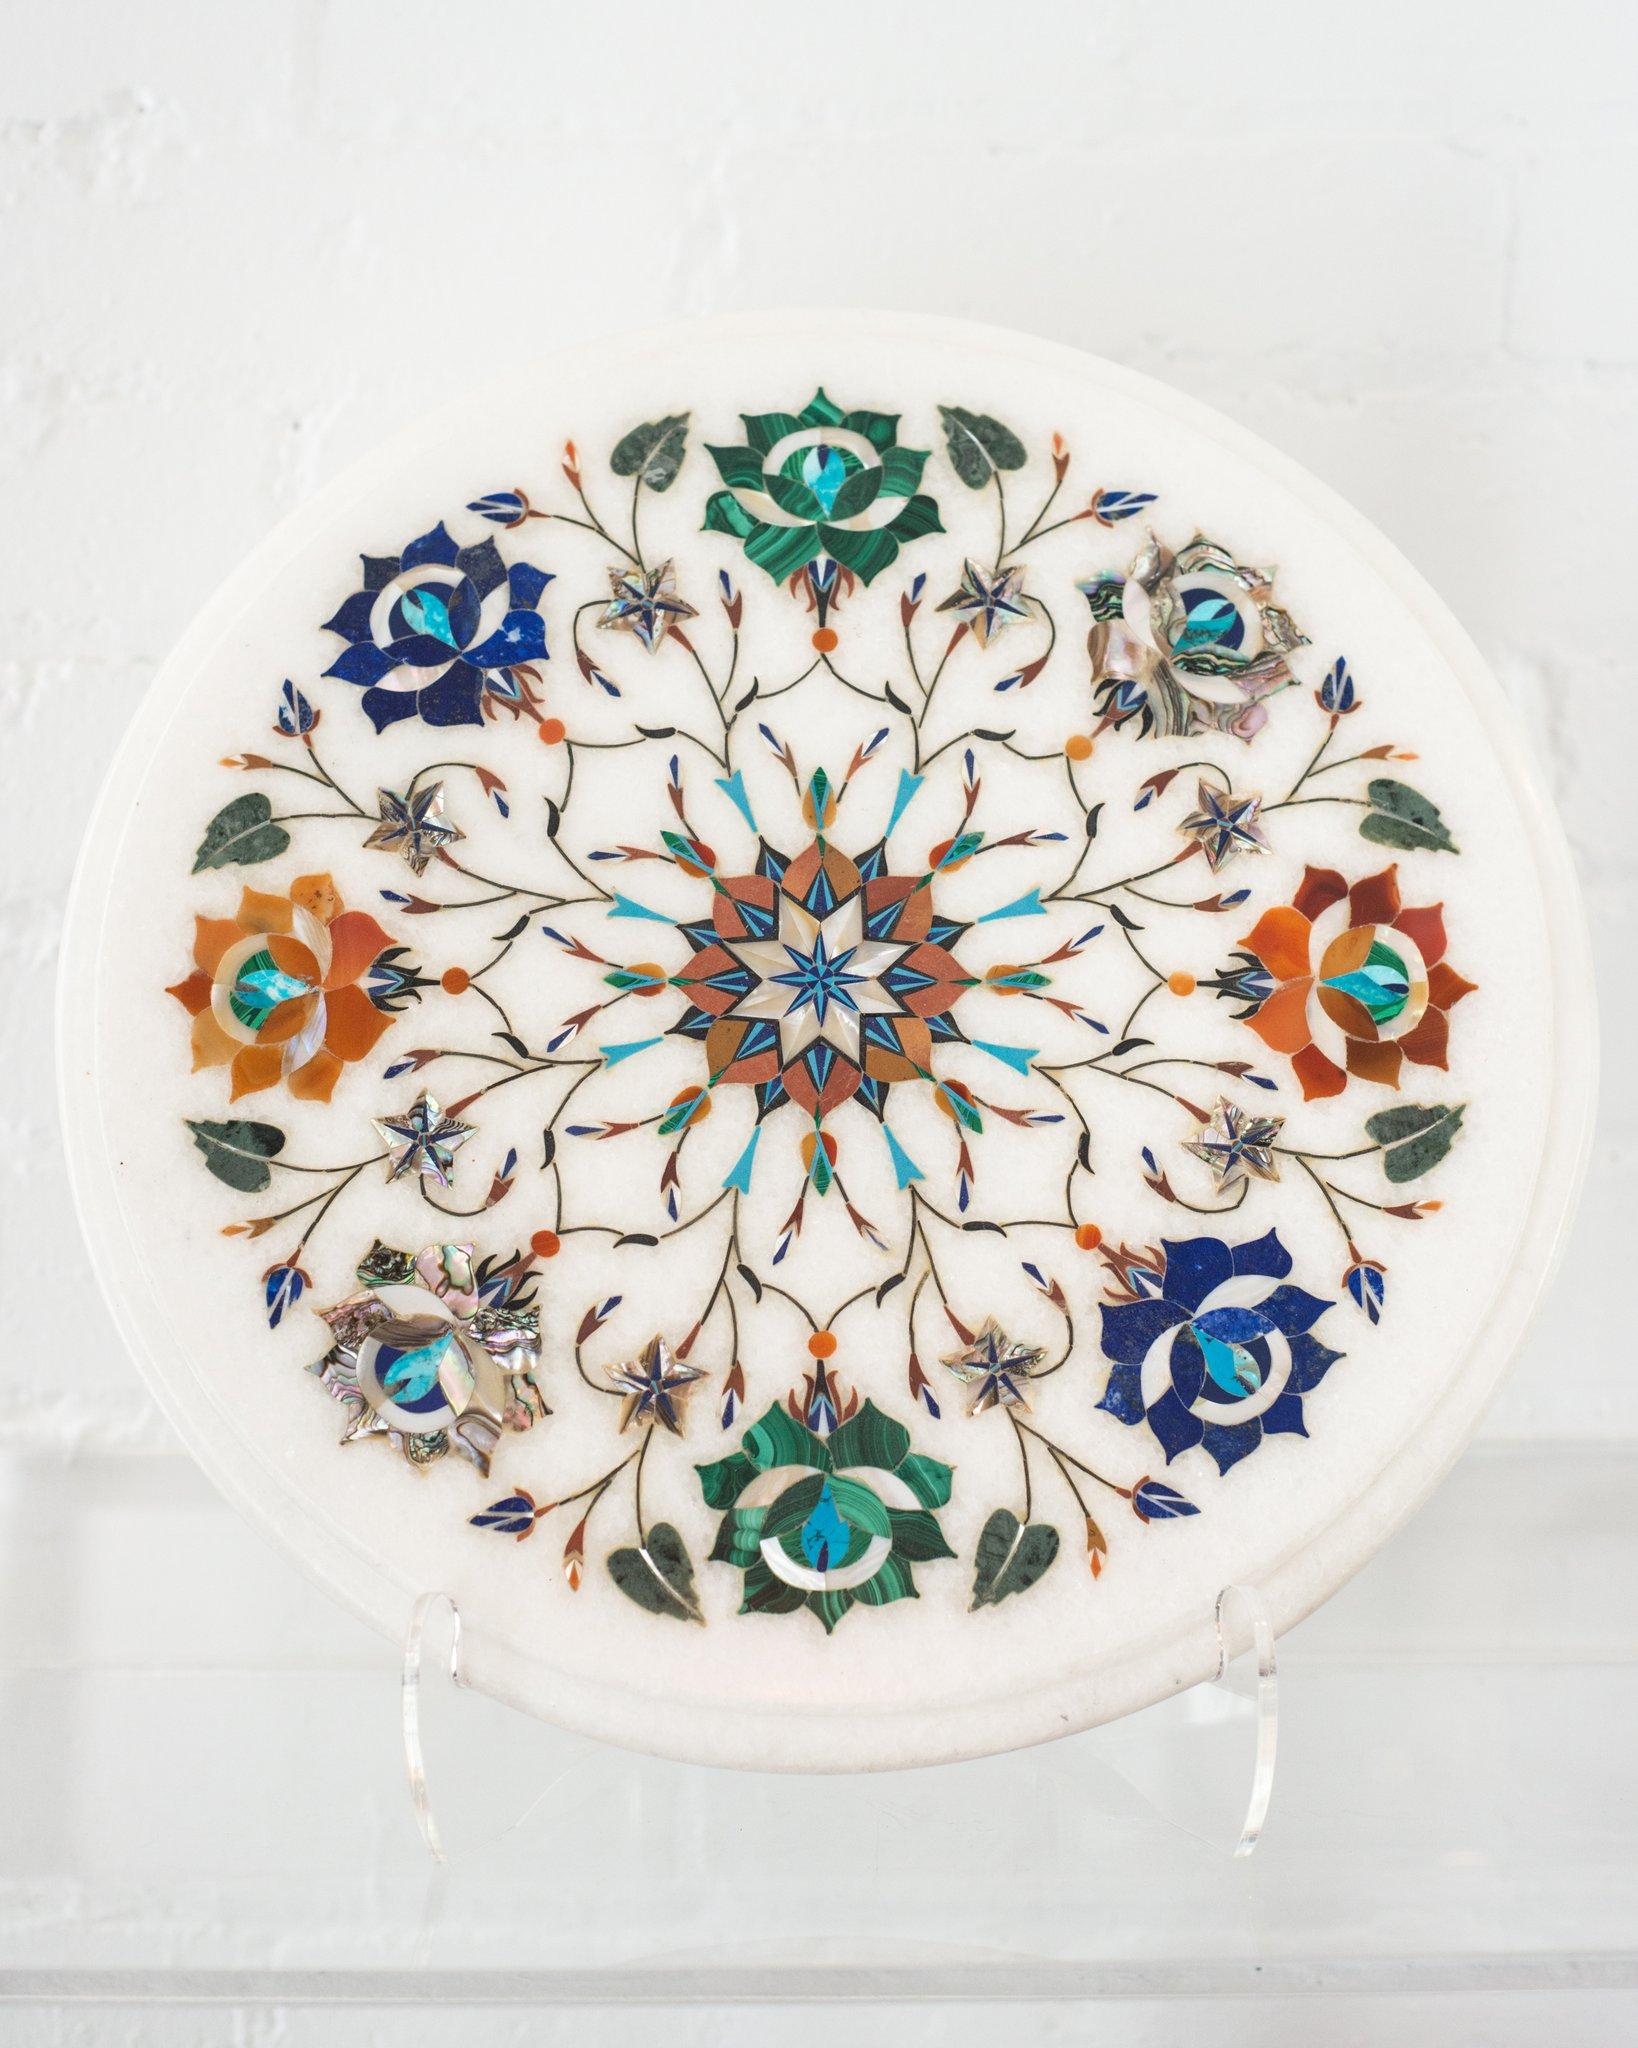 An Indian white marble platter with a colourful variety of inlaid semi-precious stones. This fine art piece would look striking placed on a coffee table or dining table to display drinks or appetizers.